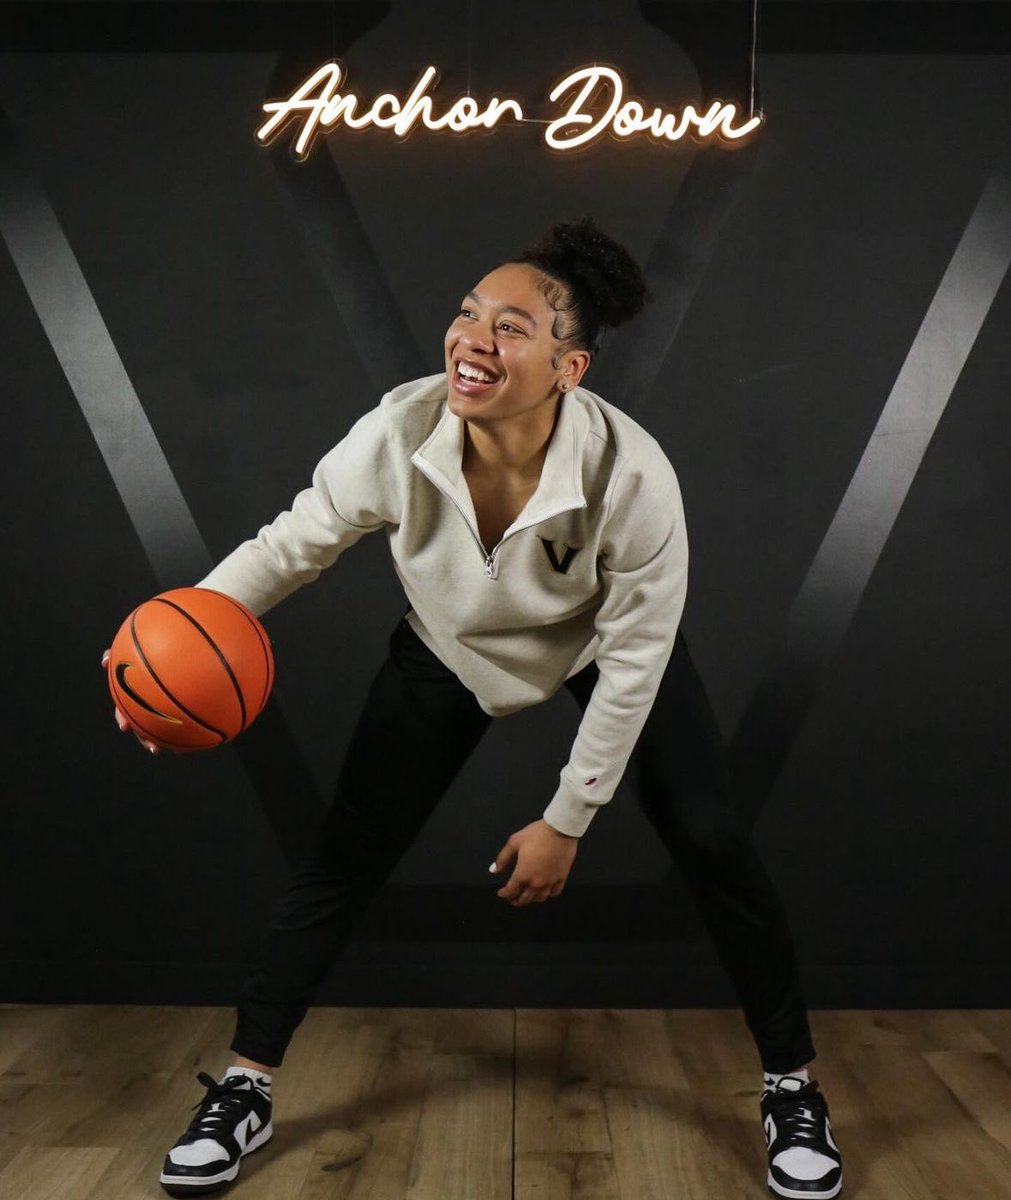 BREAKING: Penn State transfer Leilani Kapinus has committed to Vanderbilt. She averaged 11.5 ppg and 6.8 rpg as a junior. on3.com/her/news/leila…